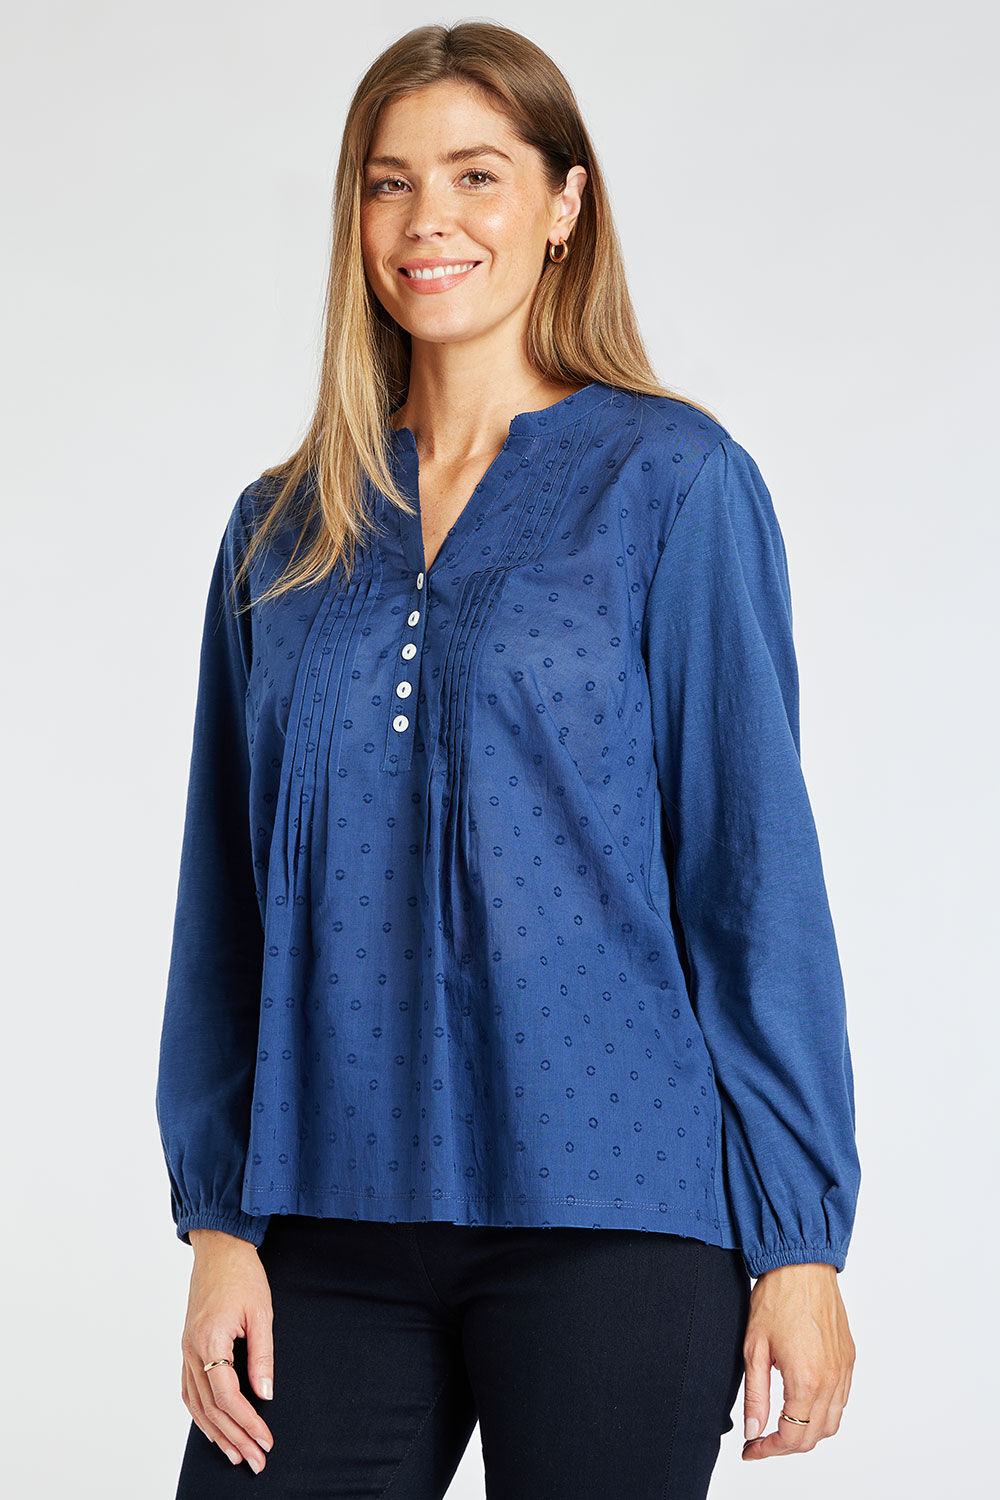 Bonmarche Women’s Navy Blue Cotton Dobby Woven 3/4 Sleeve Front Style Pintuck Blouse, Size: 12